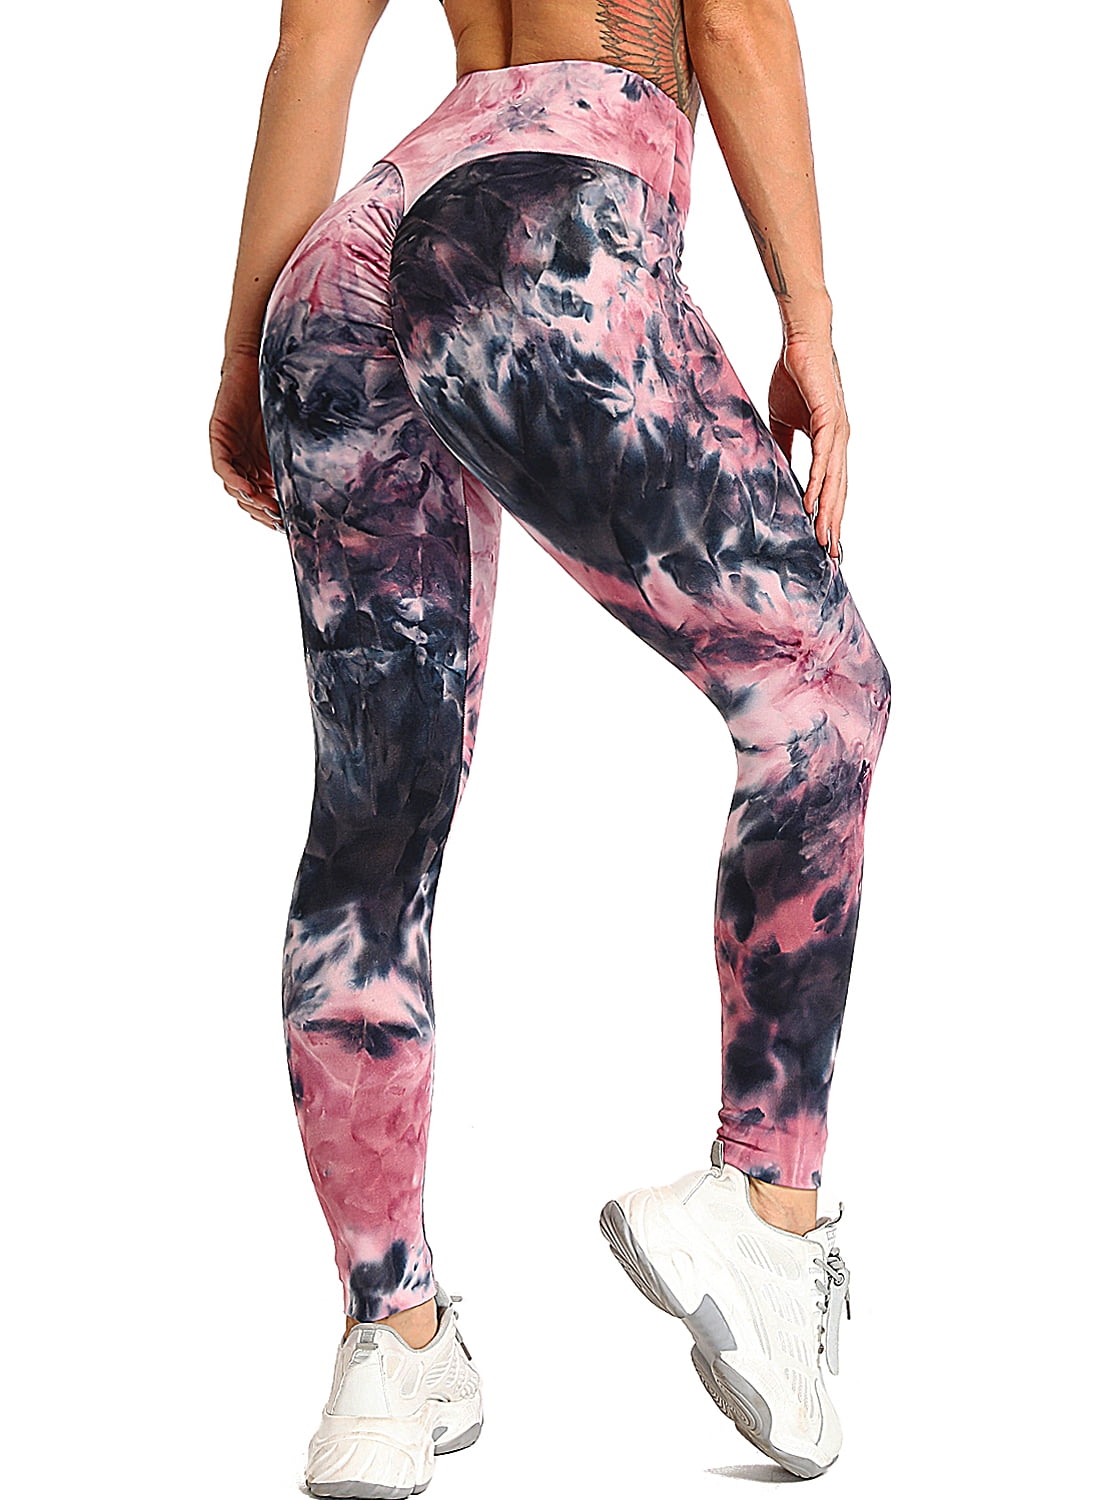 Leggings for Womens Tummy Control Buff Lift High Waist Exercise Fitness Running Tie Dye Printed Athletic Yoga Pants 